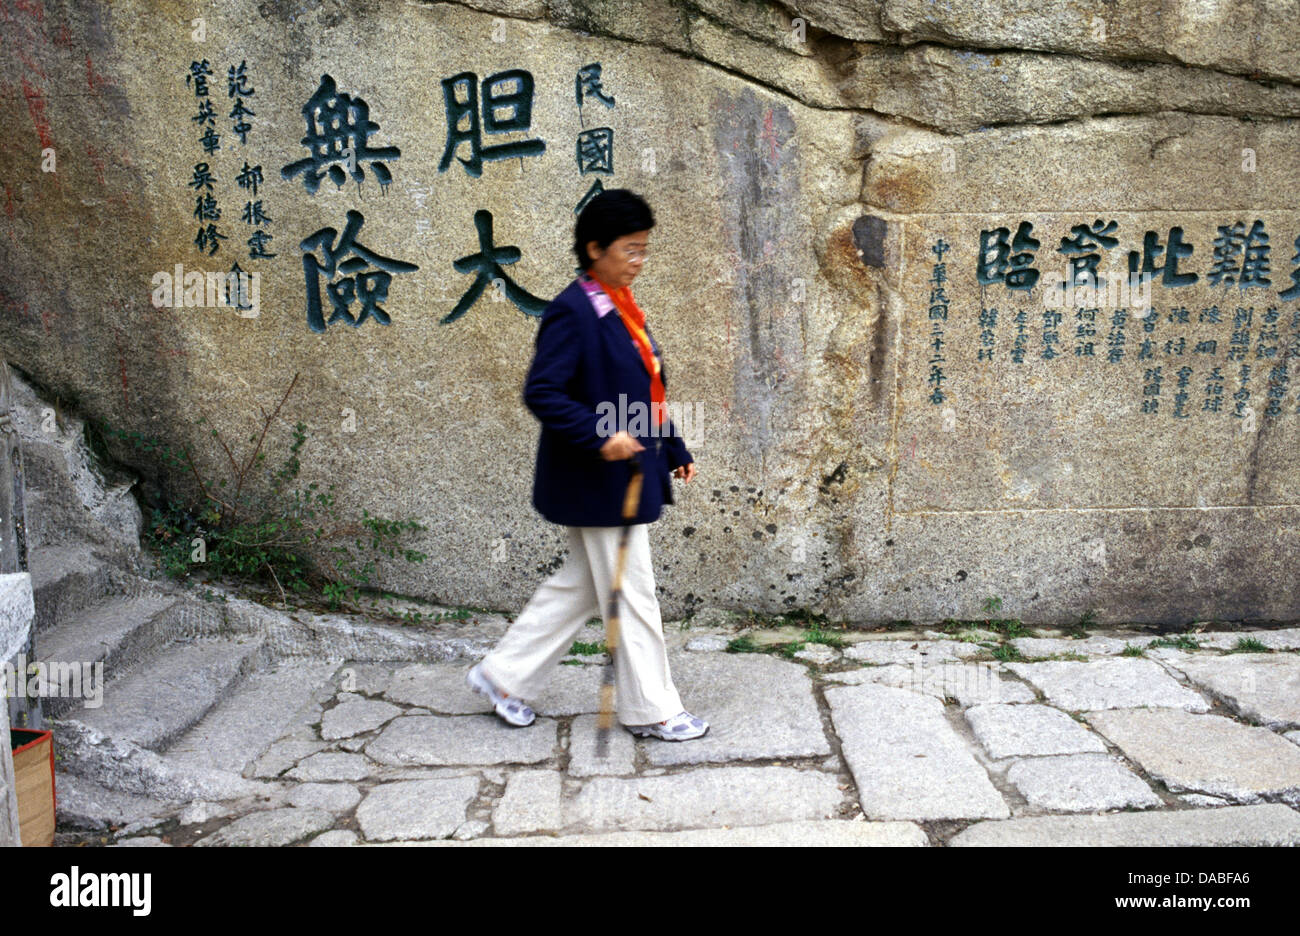 Chinese woman walking with a stick in Hua Shan mountain located near the city of Huayin in Shaanxi province China. Mount Hua is the western mountain of the Five Great Mountains of China, and has a long history of religious significance. Stock Photo